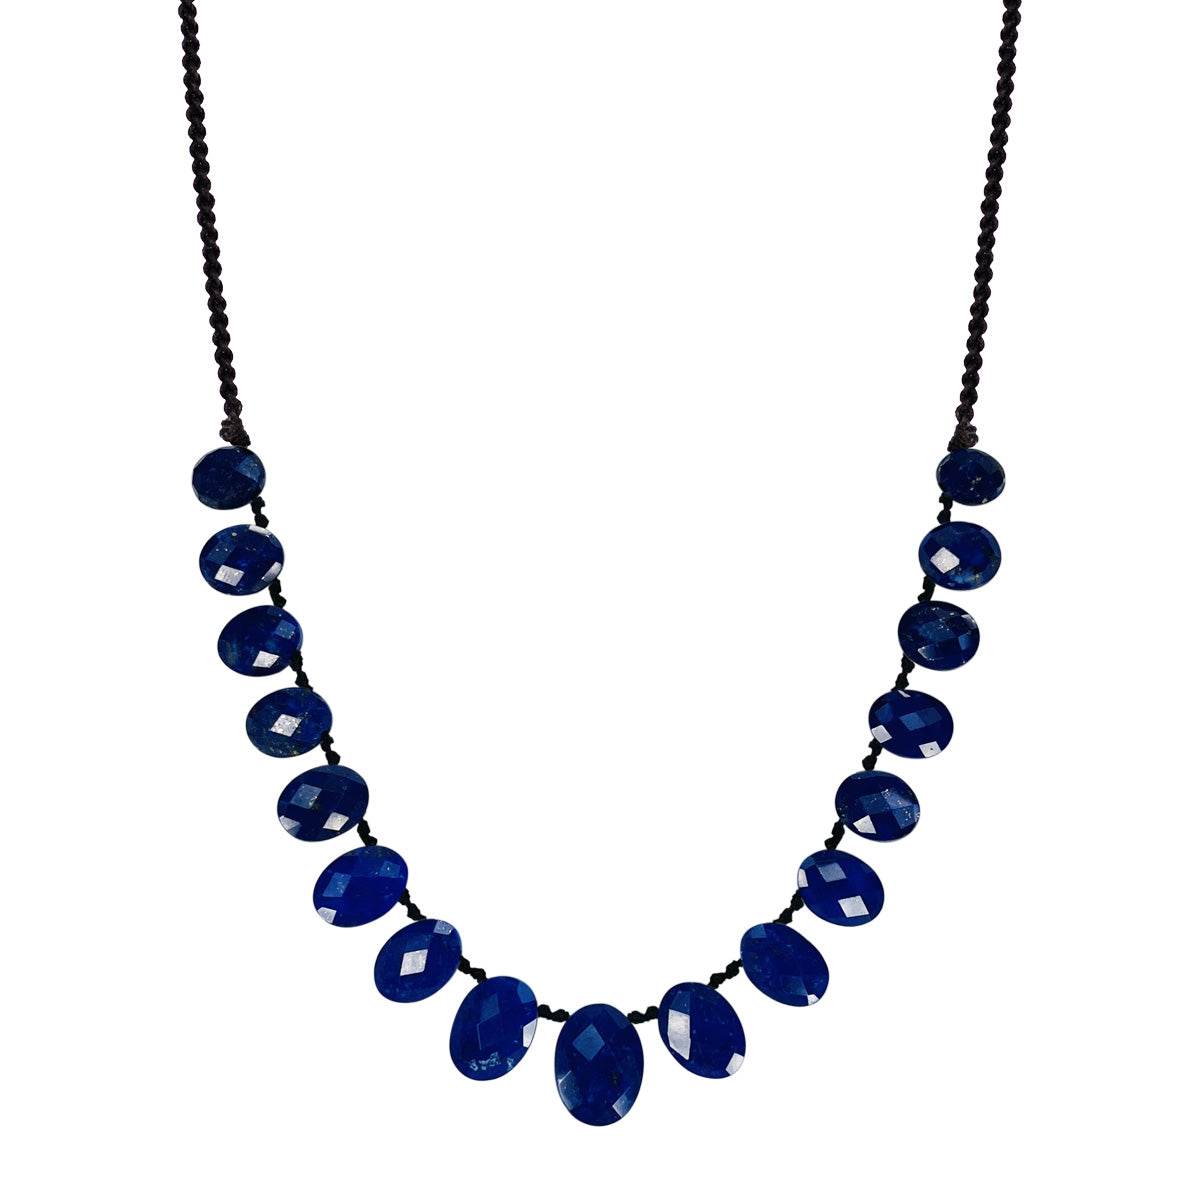 Sterling Silver Faceted Lapis Oval Beaded Necklace on Black Cord